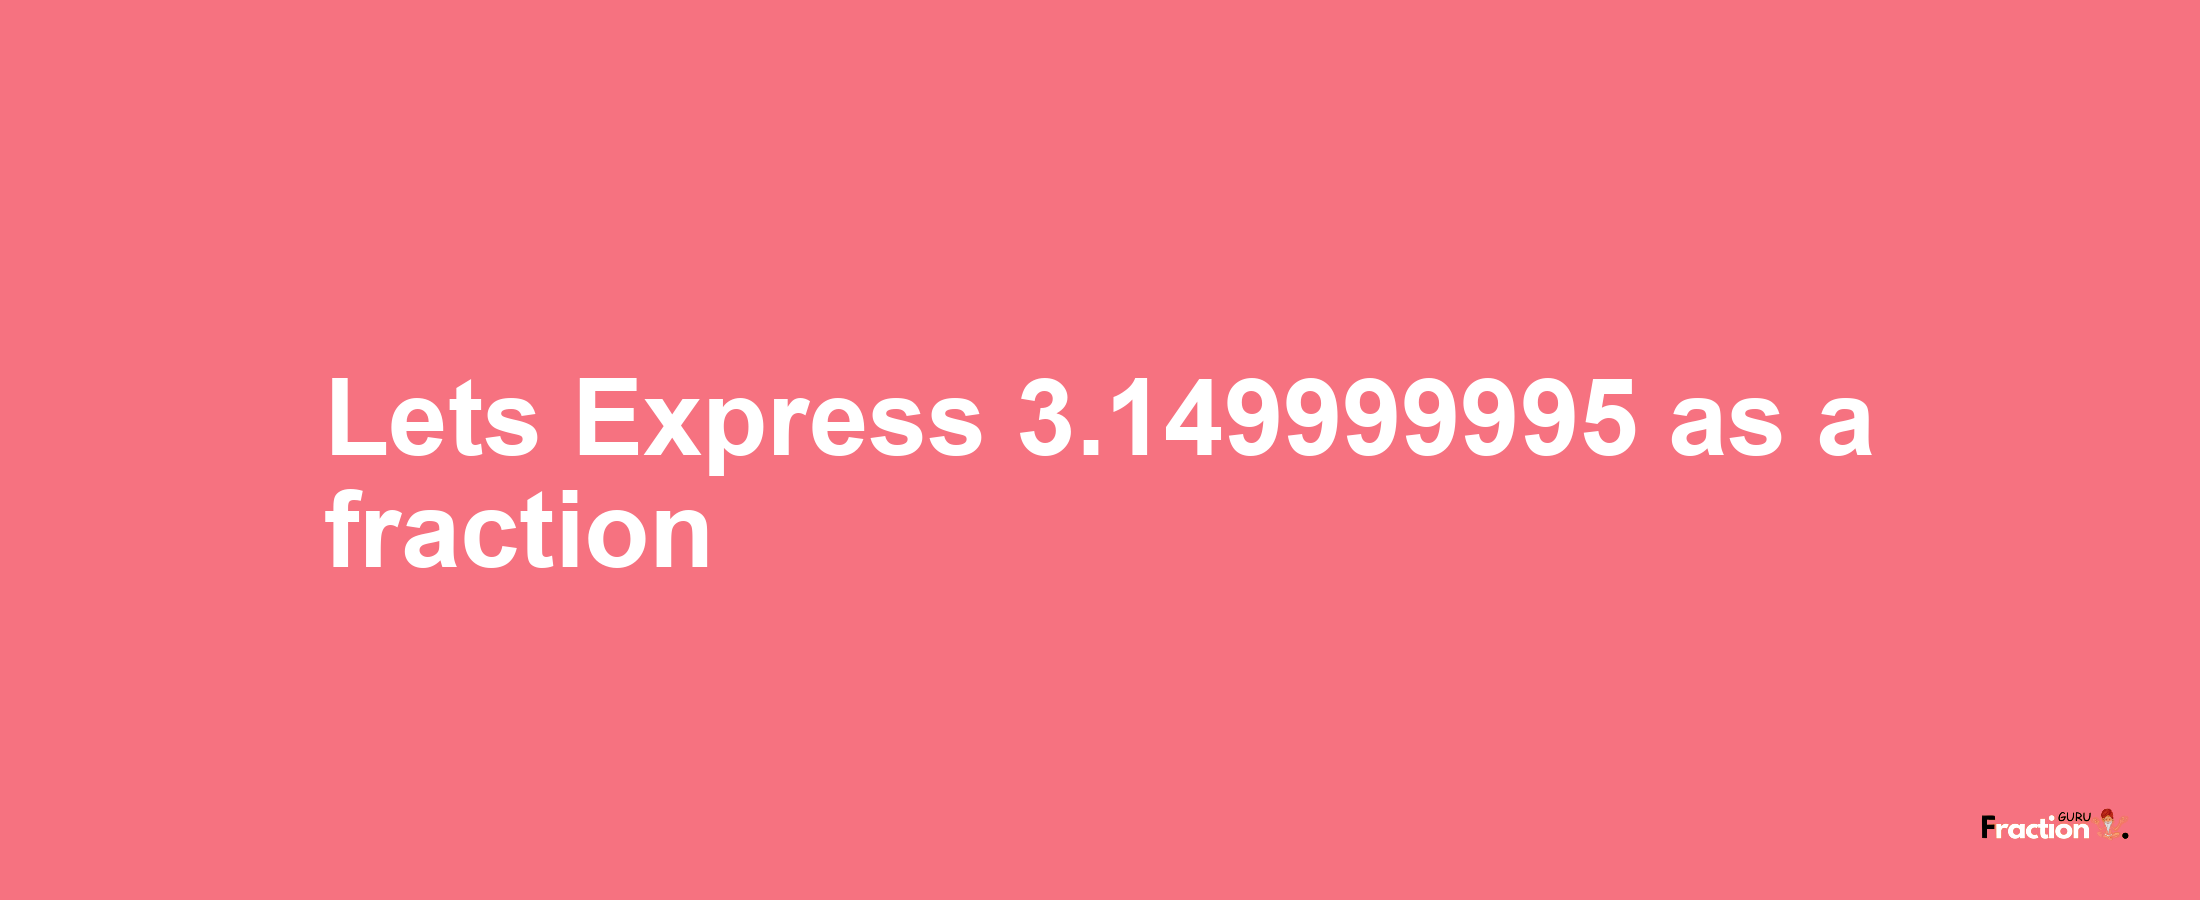 Lets Express 3.149999995 as afraction